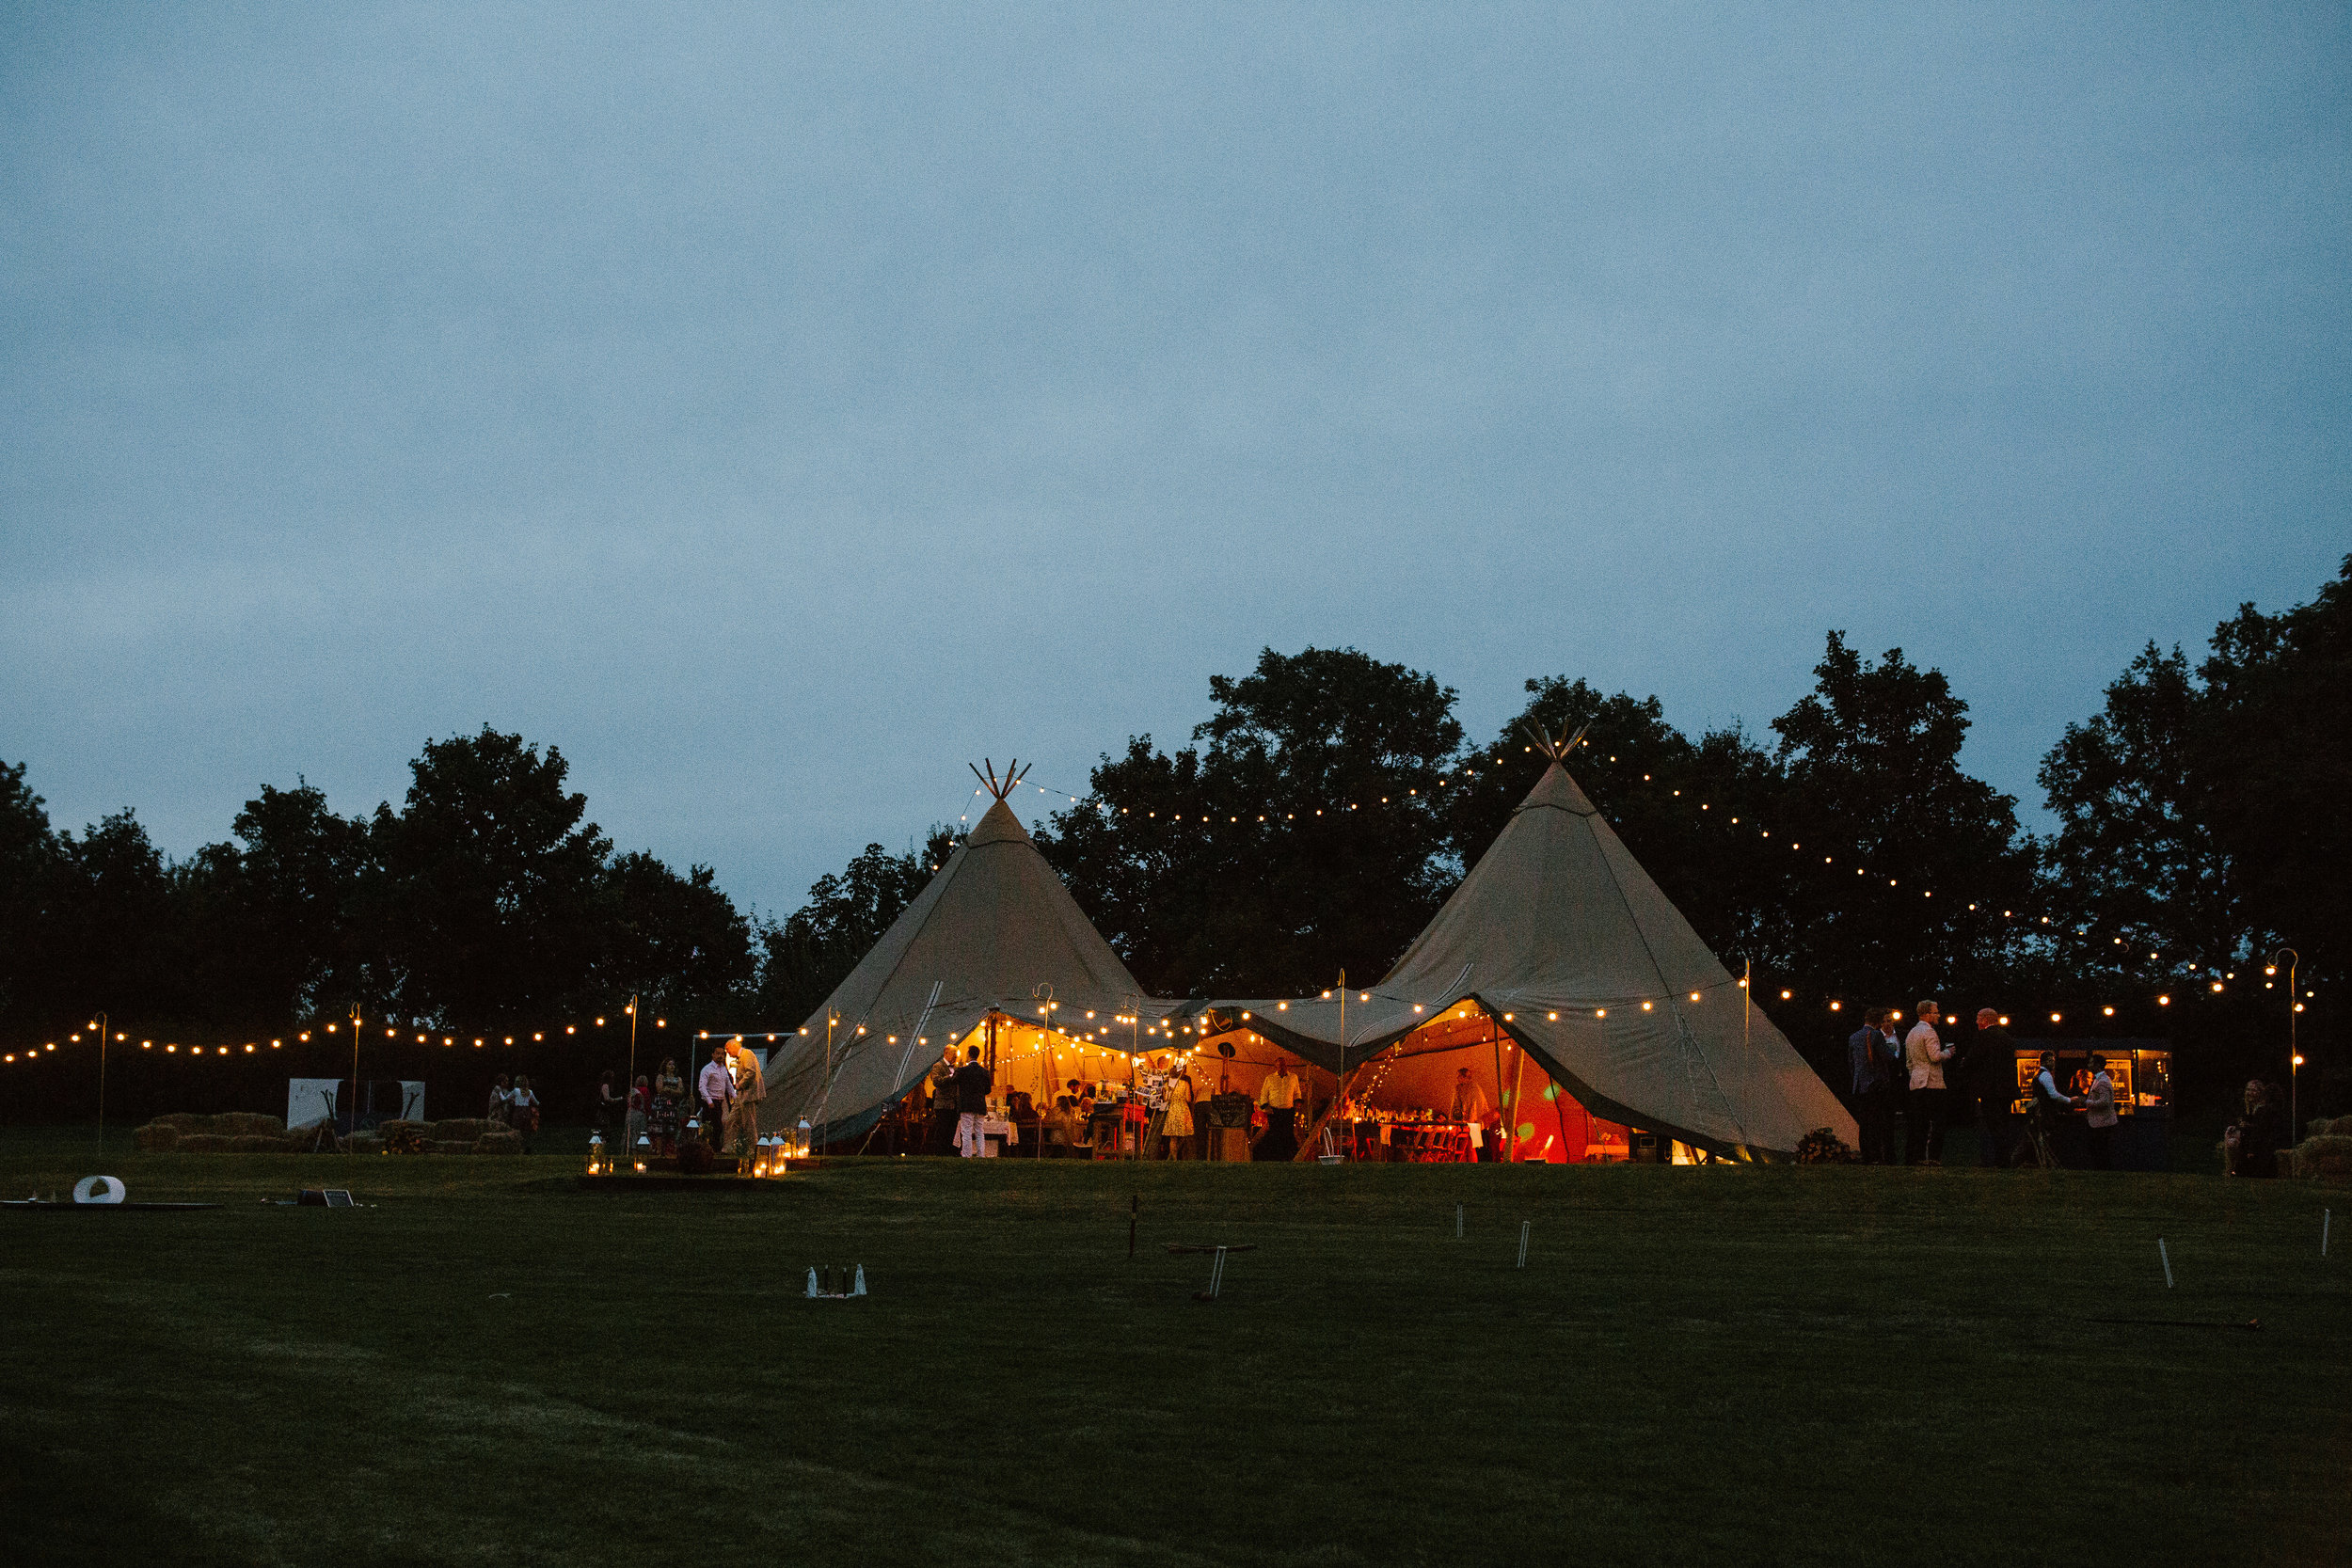 shot of the tipi at night time with the festoon lights creating an atmosphere